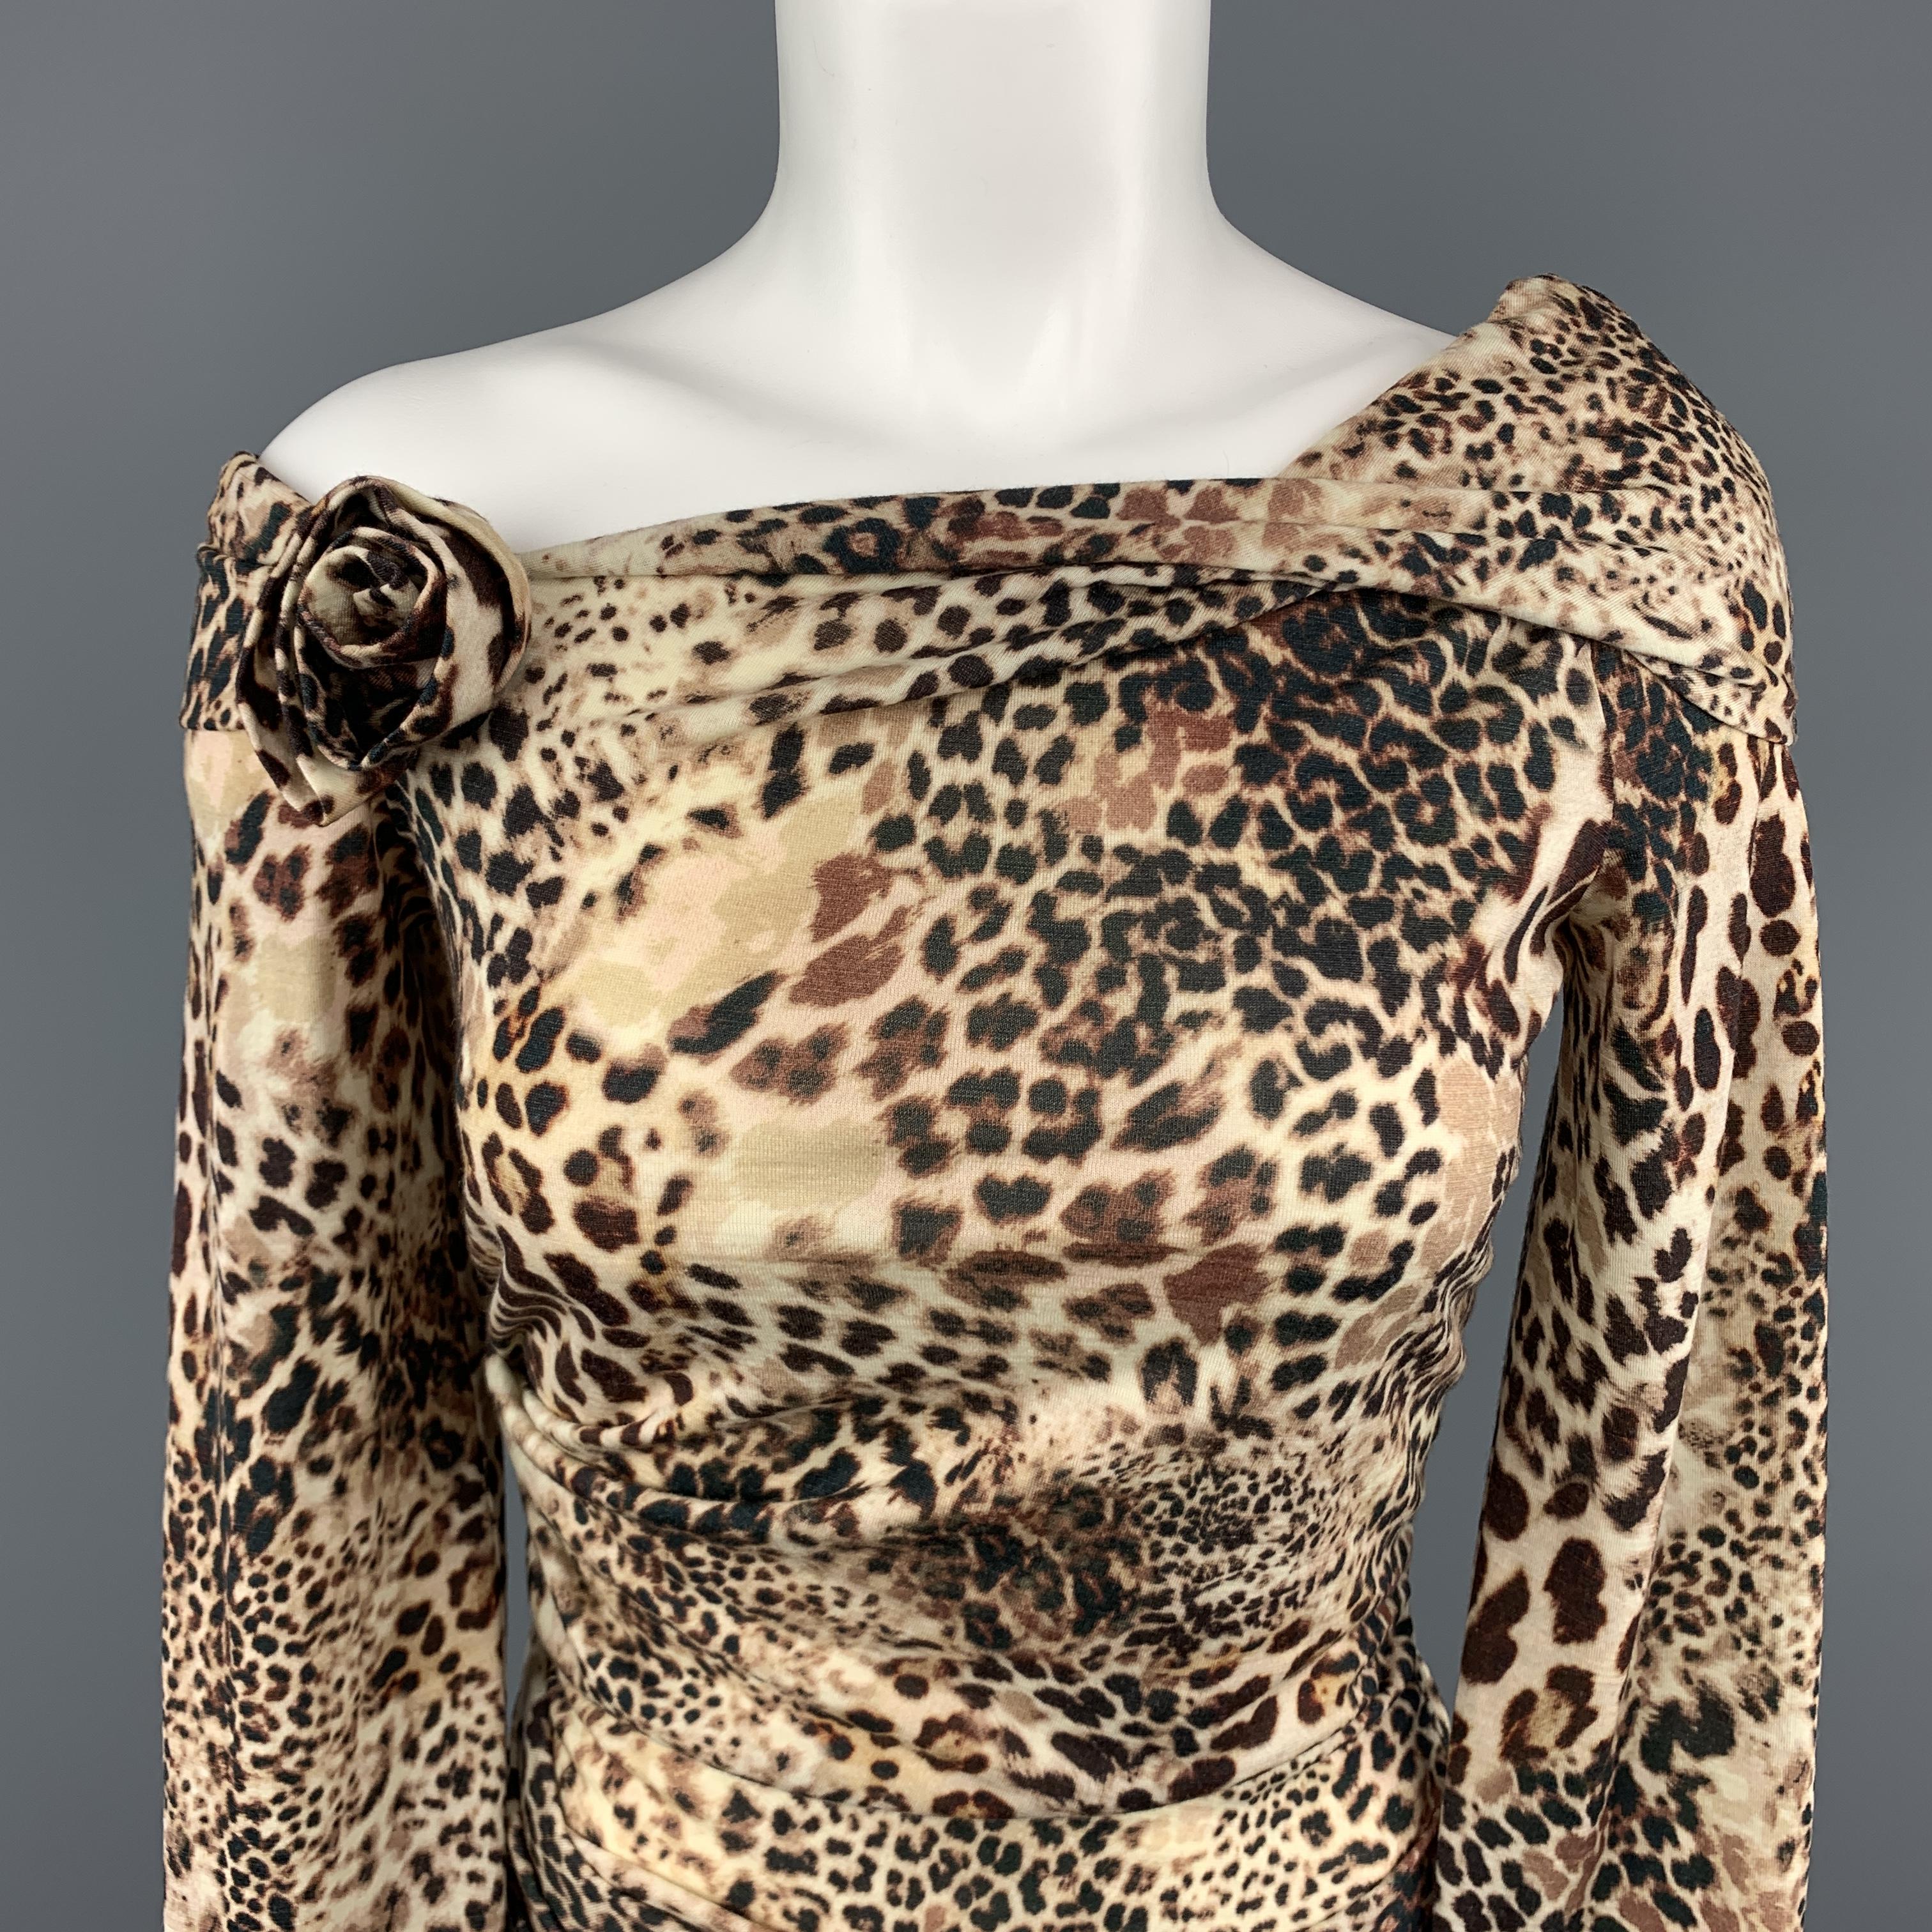 BLUMARINE top comes in beige leopard print wool jersey knit with a ruched body, long sleeves, and asymmetrical off the shoulder cuff neckline with rosette. Made in Italy.
 
Excellent Pre-Owned Condition.
Marked: 4
 
Measurements:
 
Shoulder:17